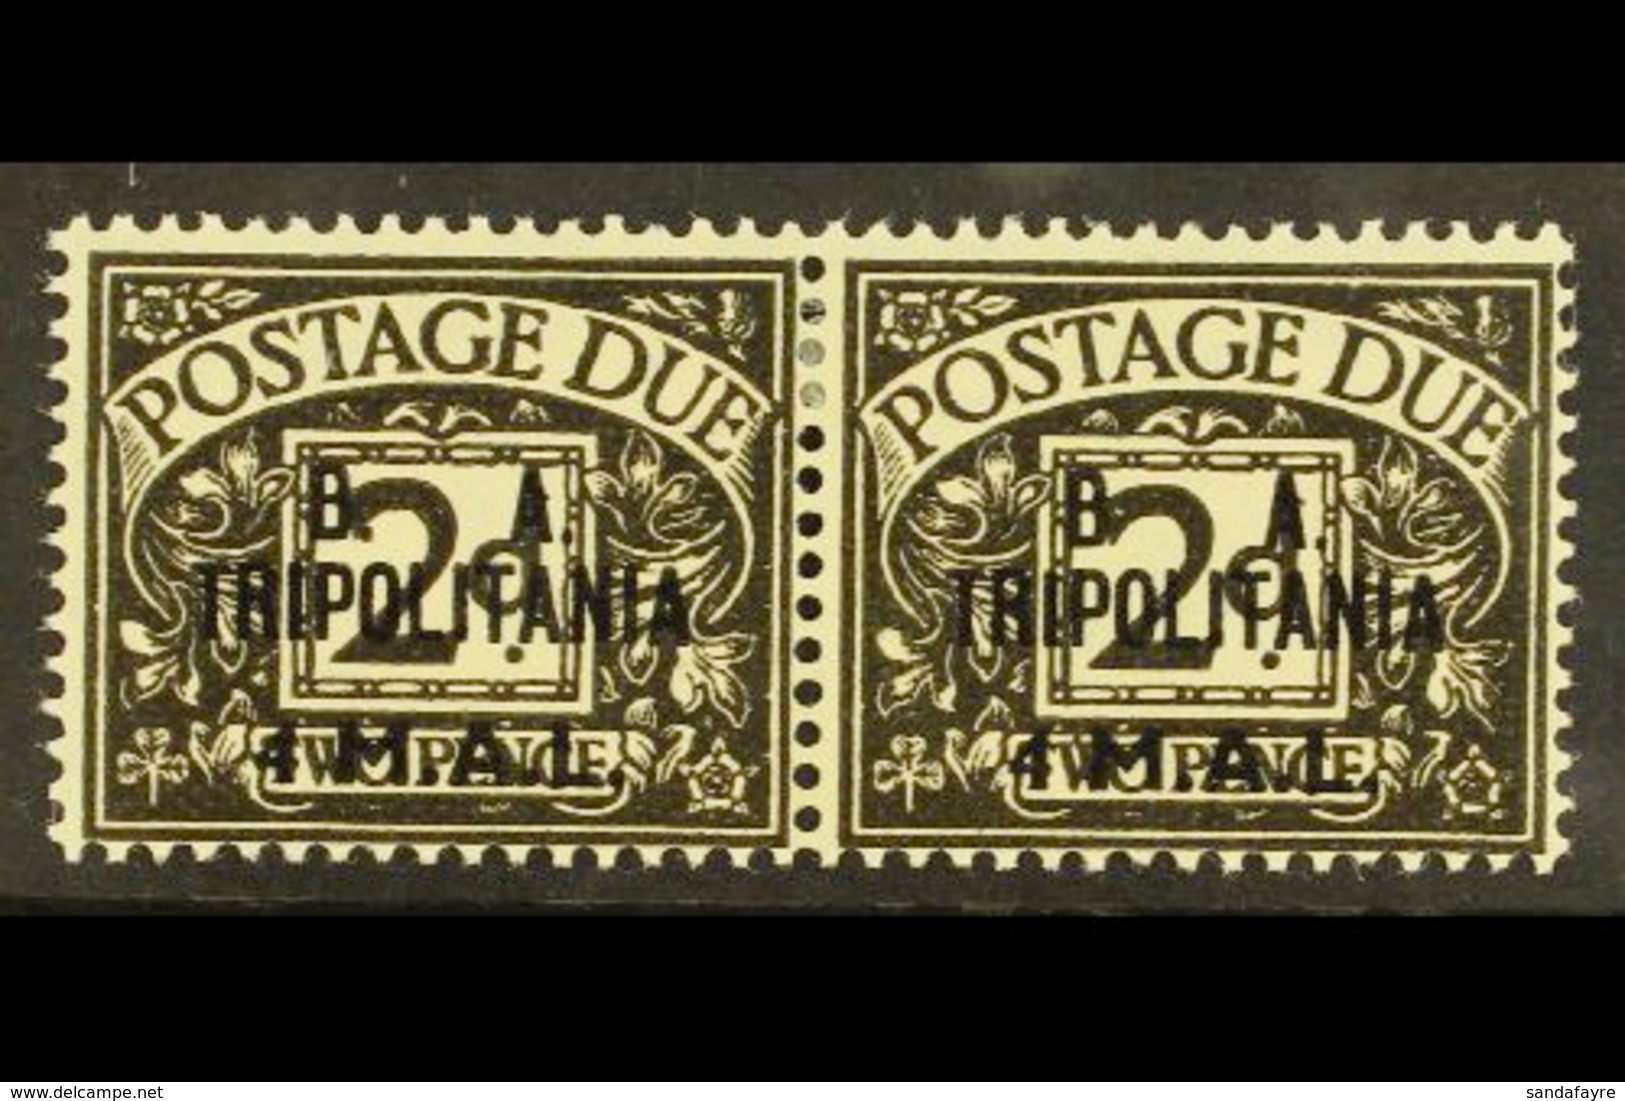 TRIPOLITANIA POSTAGE DUES - 1950 4l On 2d Agate, Pair One Showing Variety "No Stop After B", SG TD8+TD8a, Very Fine Mint - Italian Eastern Africa